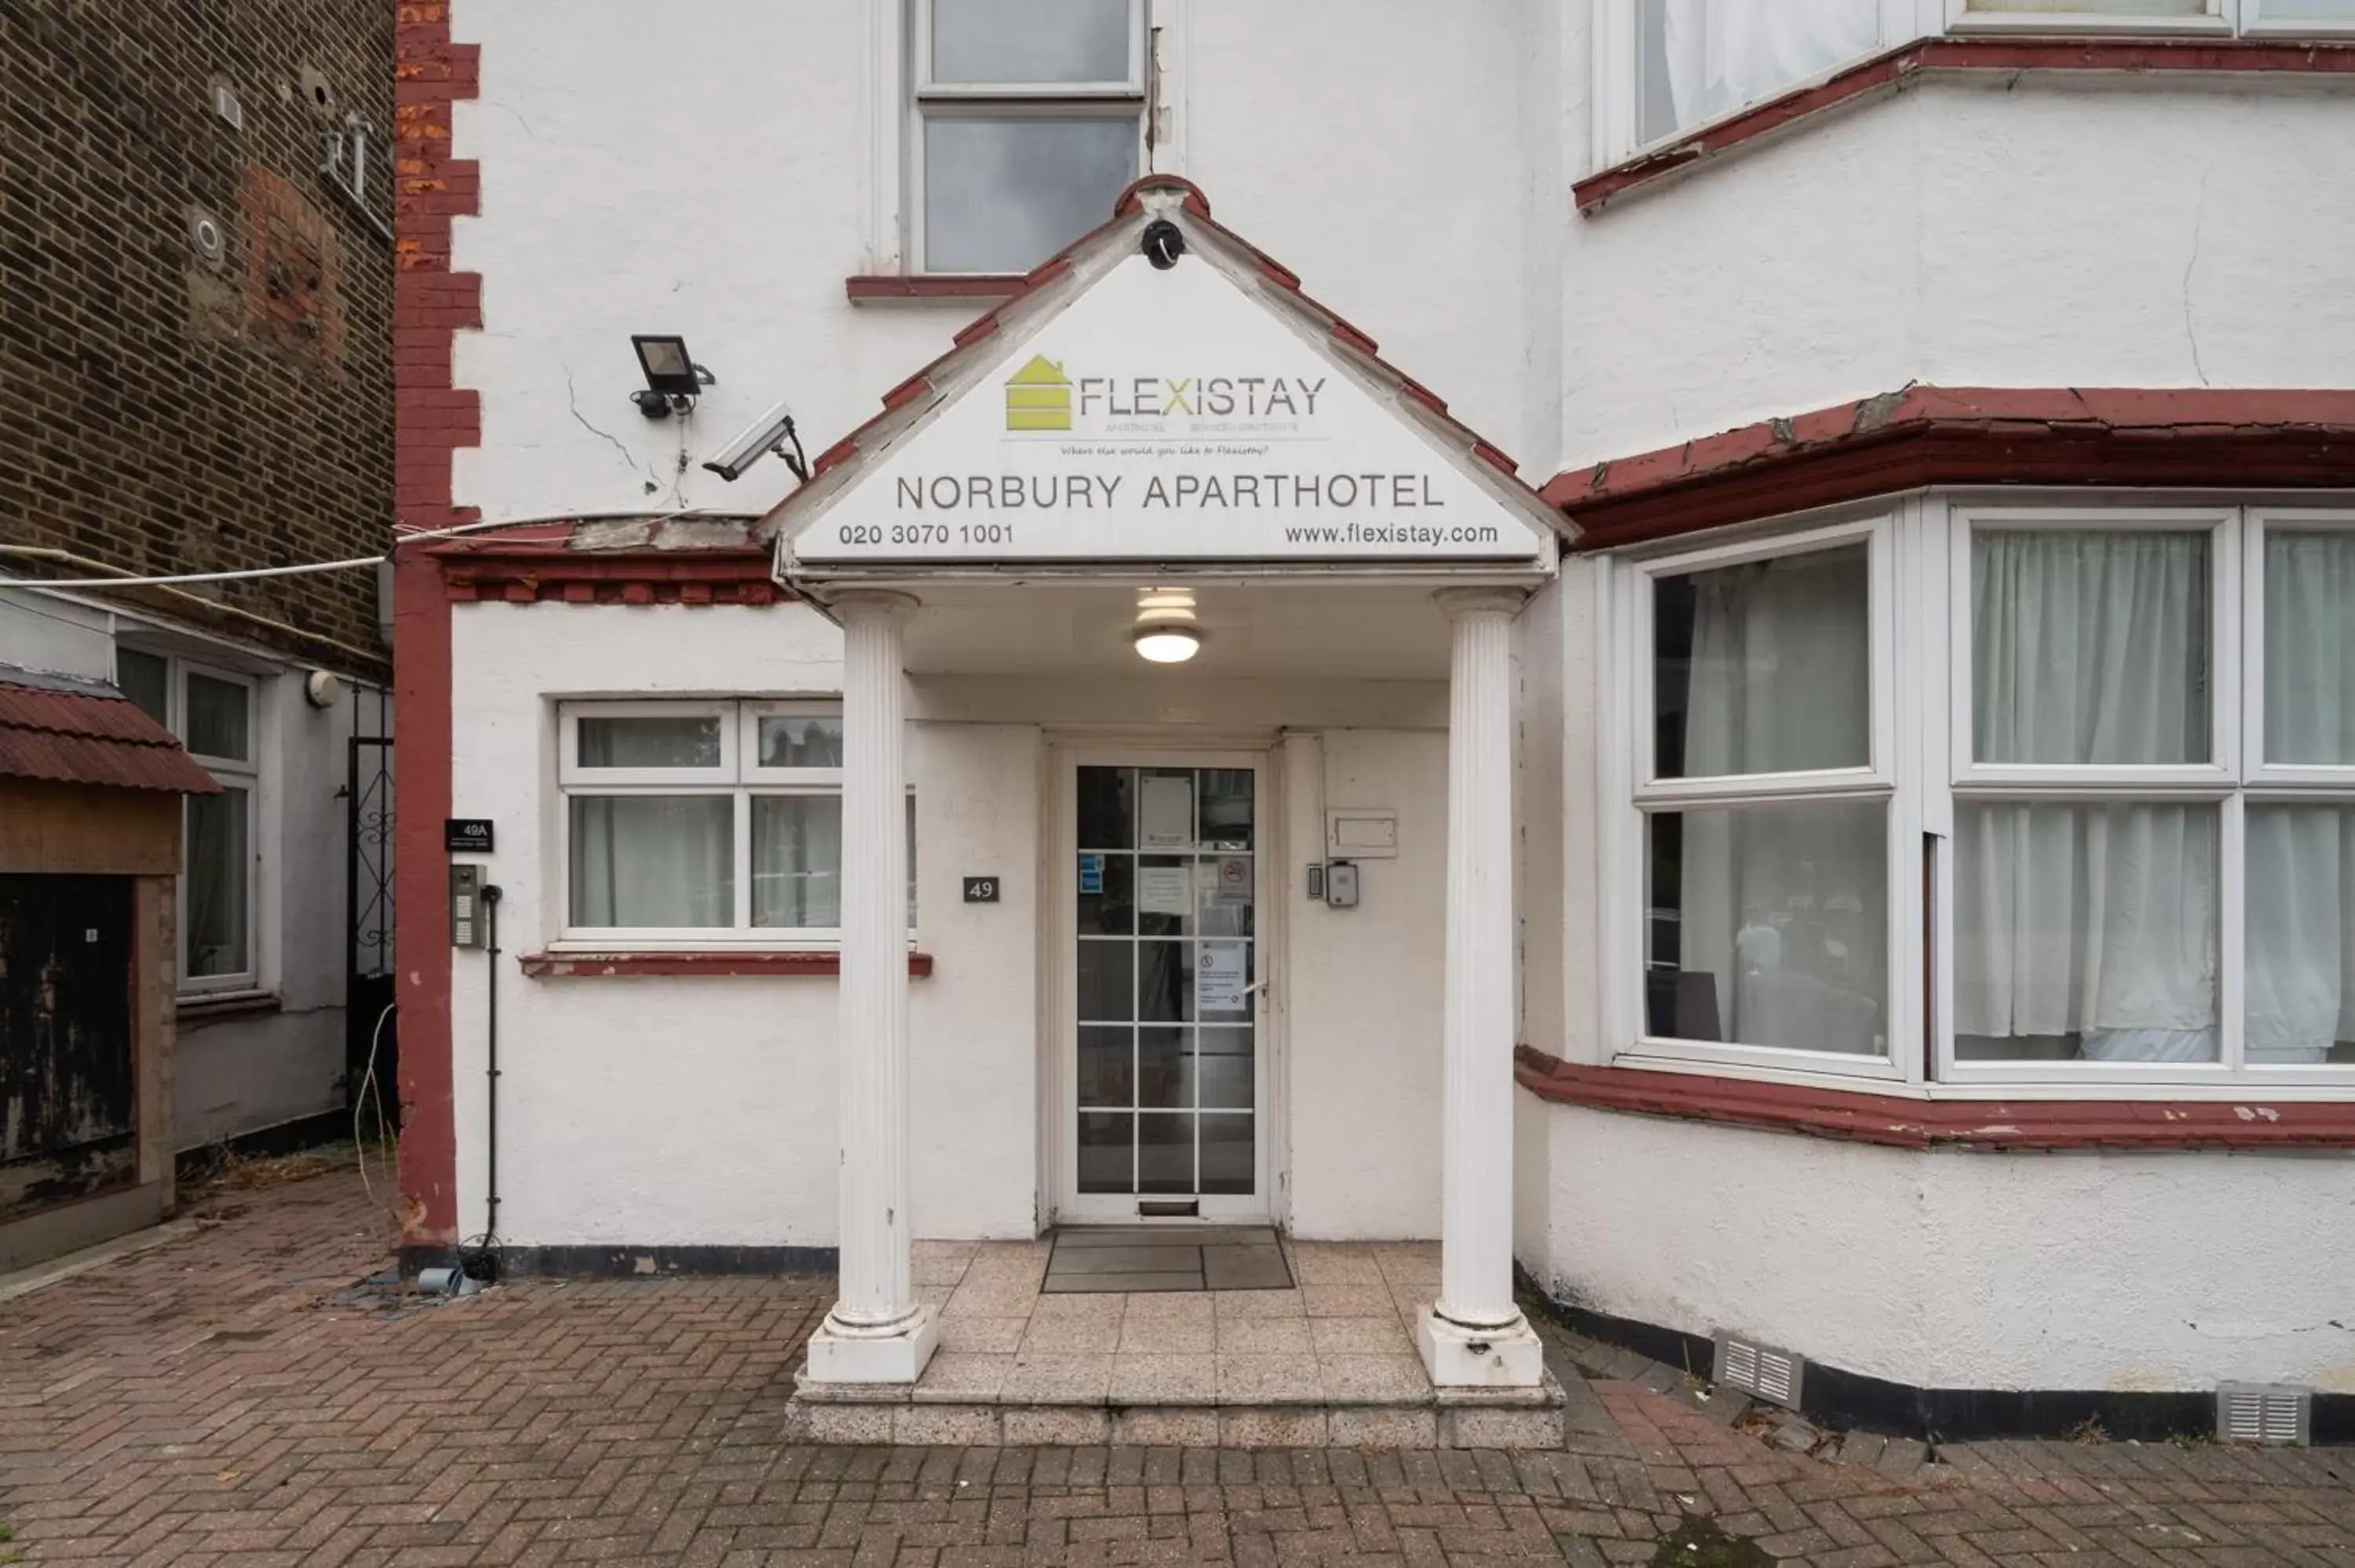 Property building in Flexistay Norbury Aparthotel